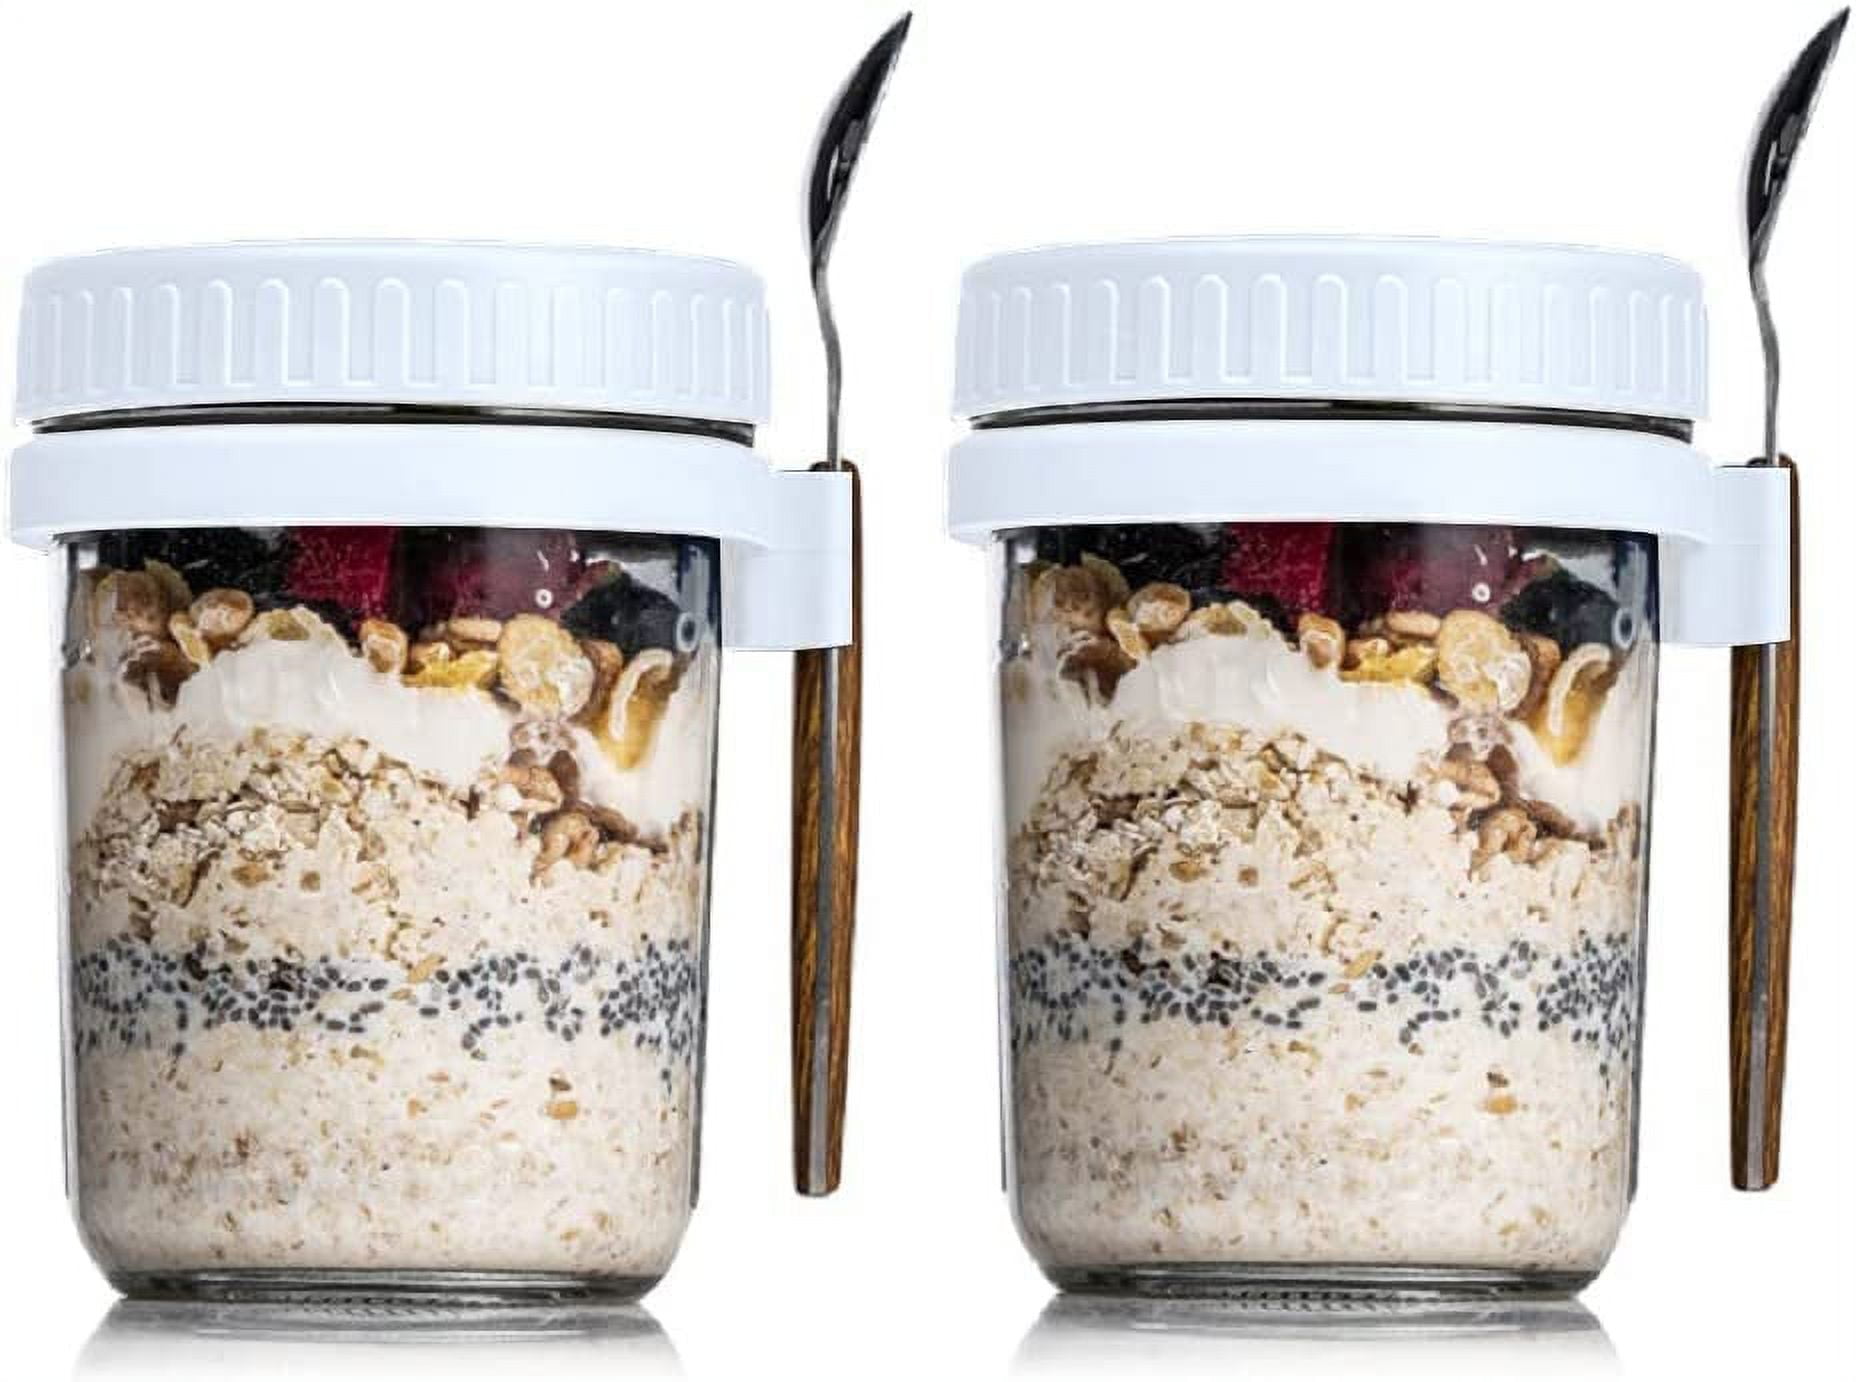 Rebrilliant Binz Overnight Oats Containers With Lids And Spoon, 4 Pack  Mason Jars, 16 Oz Glass Container To Go For Chia Pudding Yogurt Salad  Cereal Meal Prep